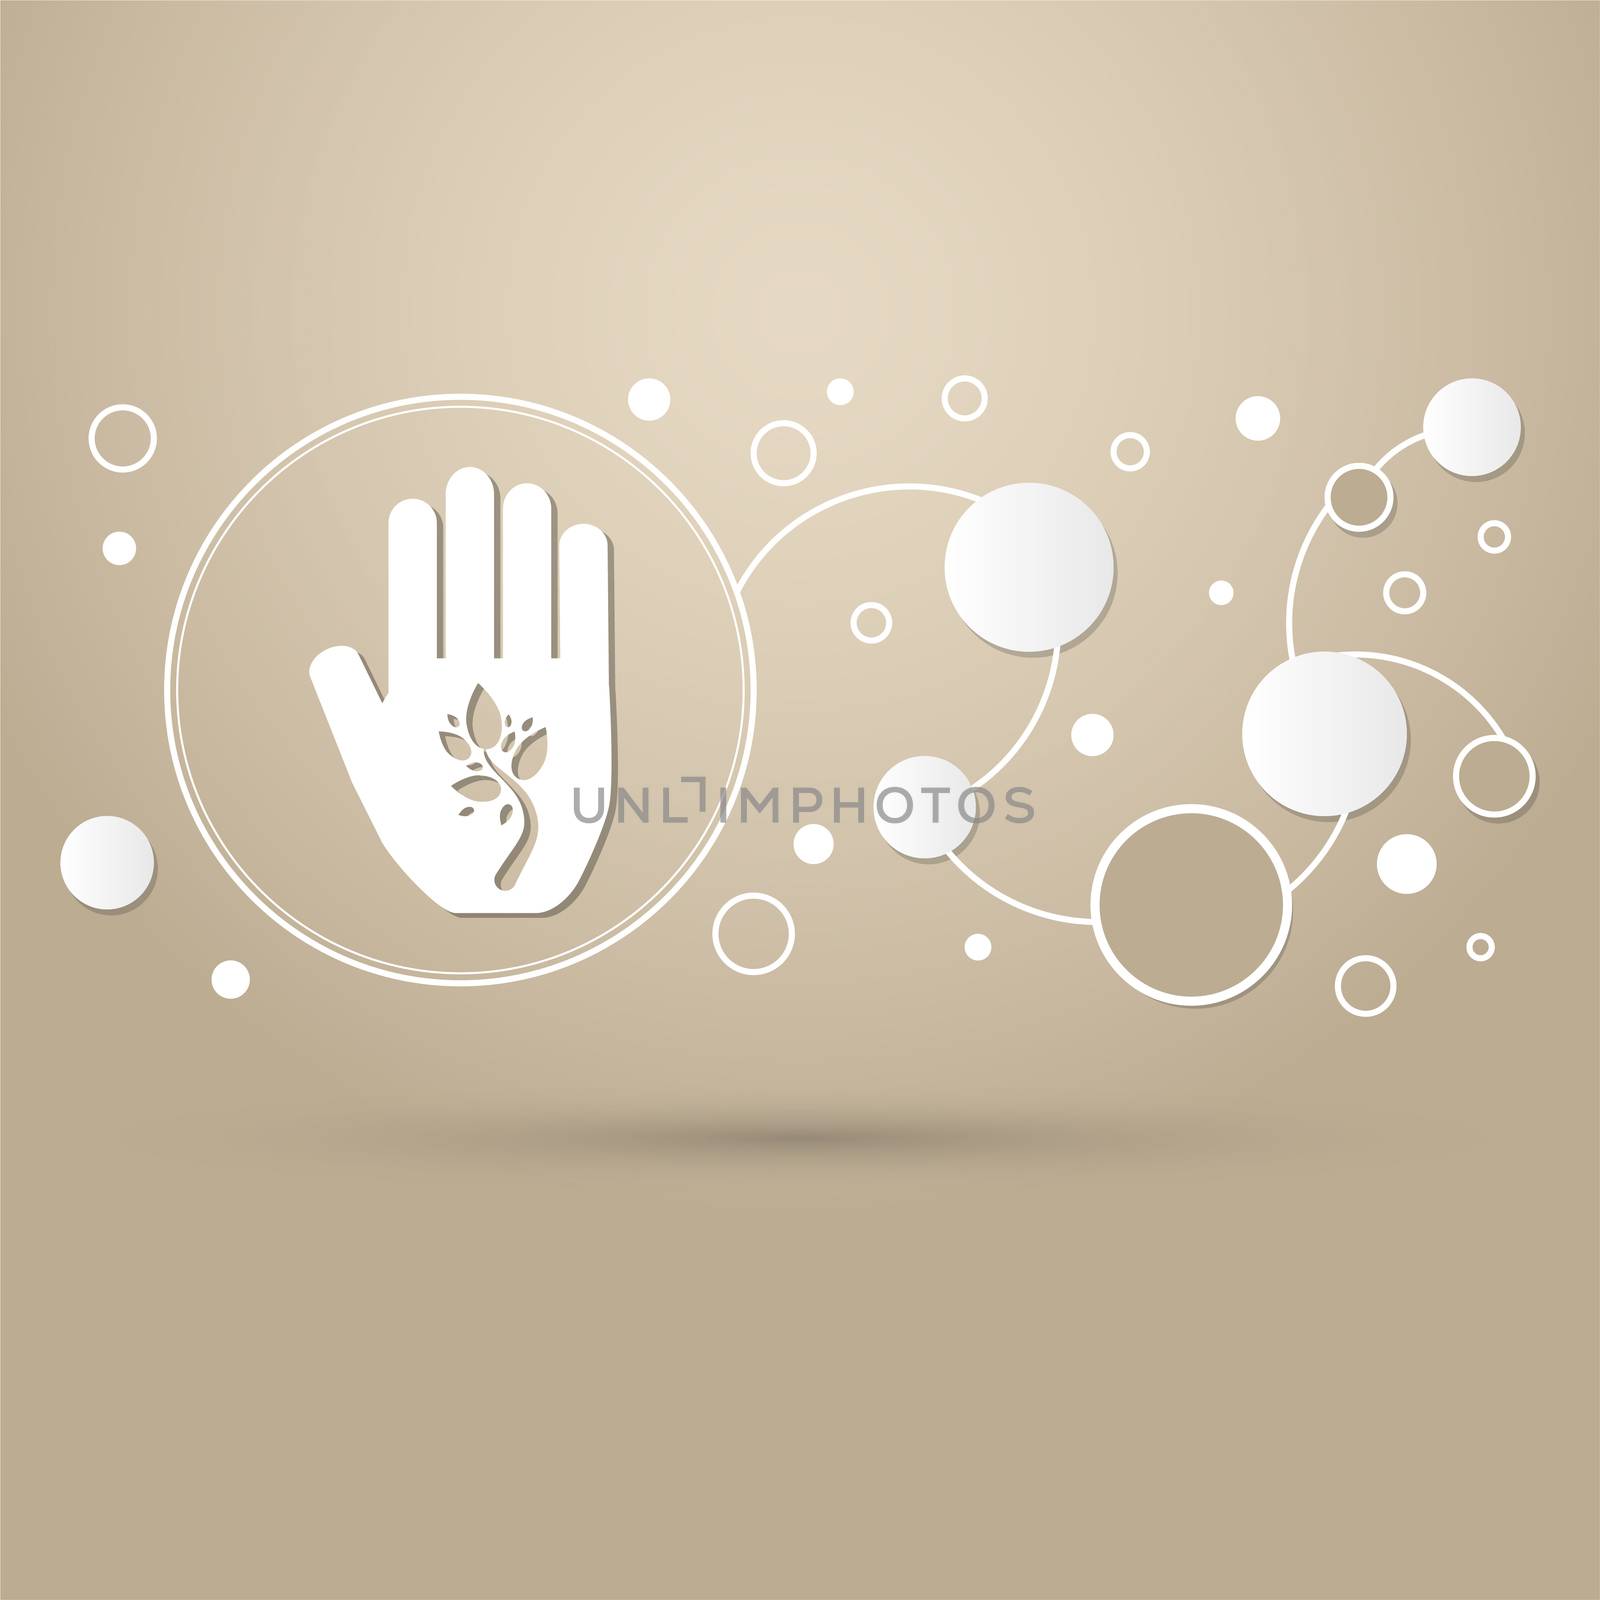 ecological beauty and health care, enviromental protection icon on a brown background with elegant style and modern design infographic. illustration